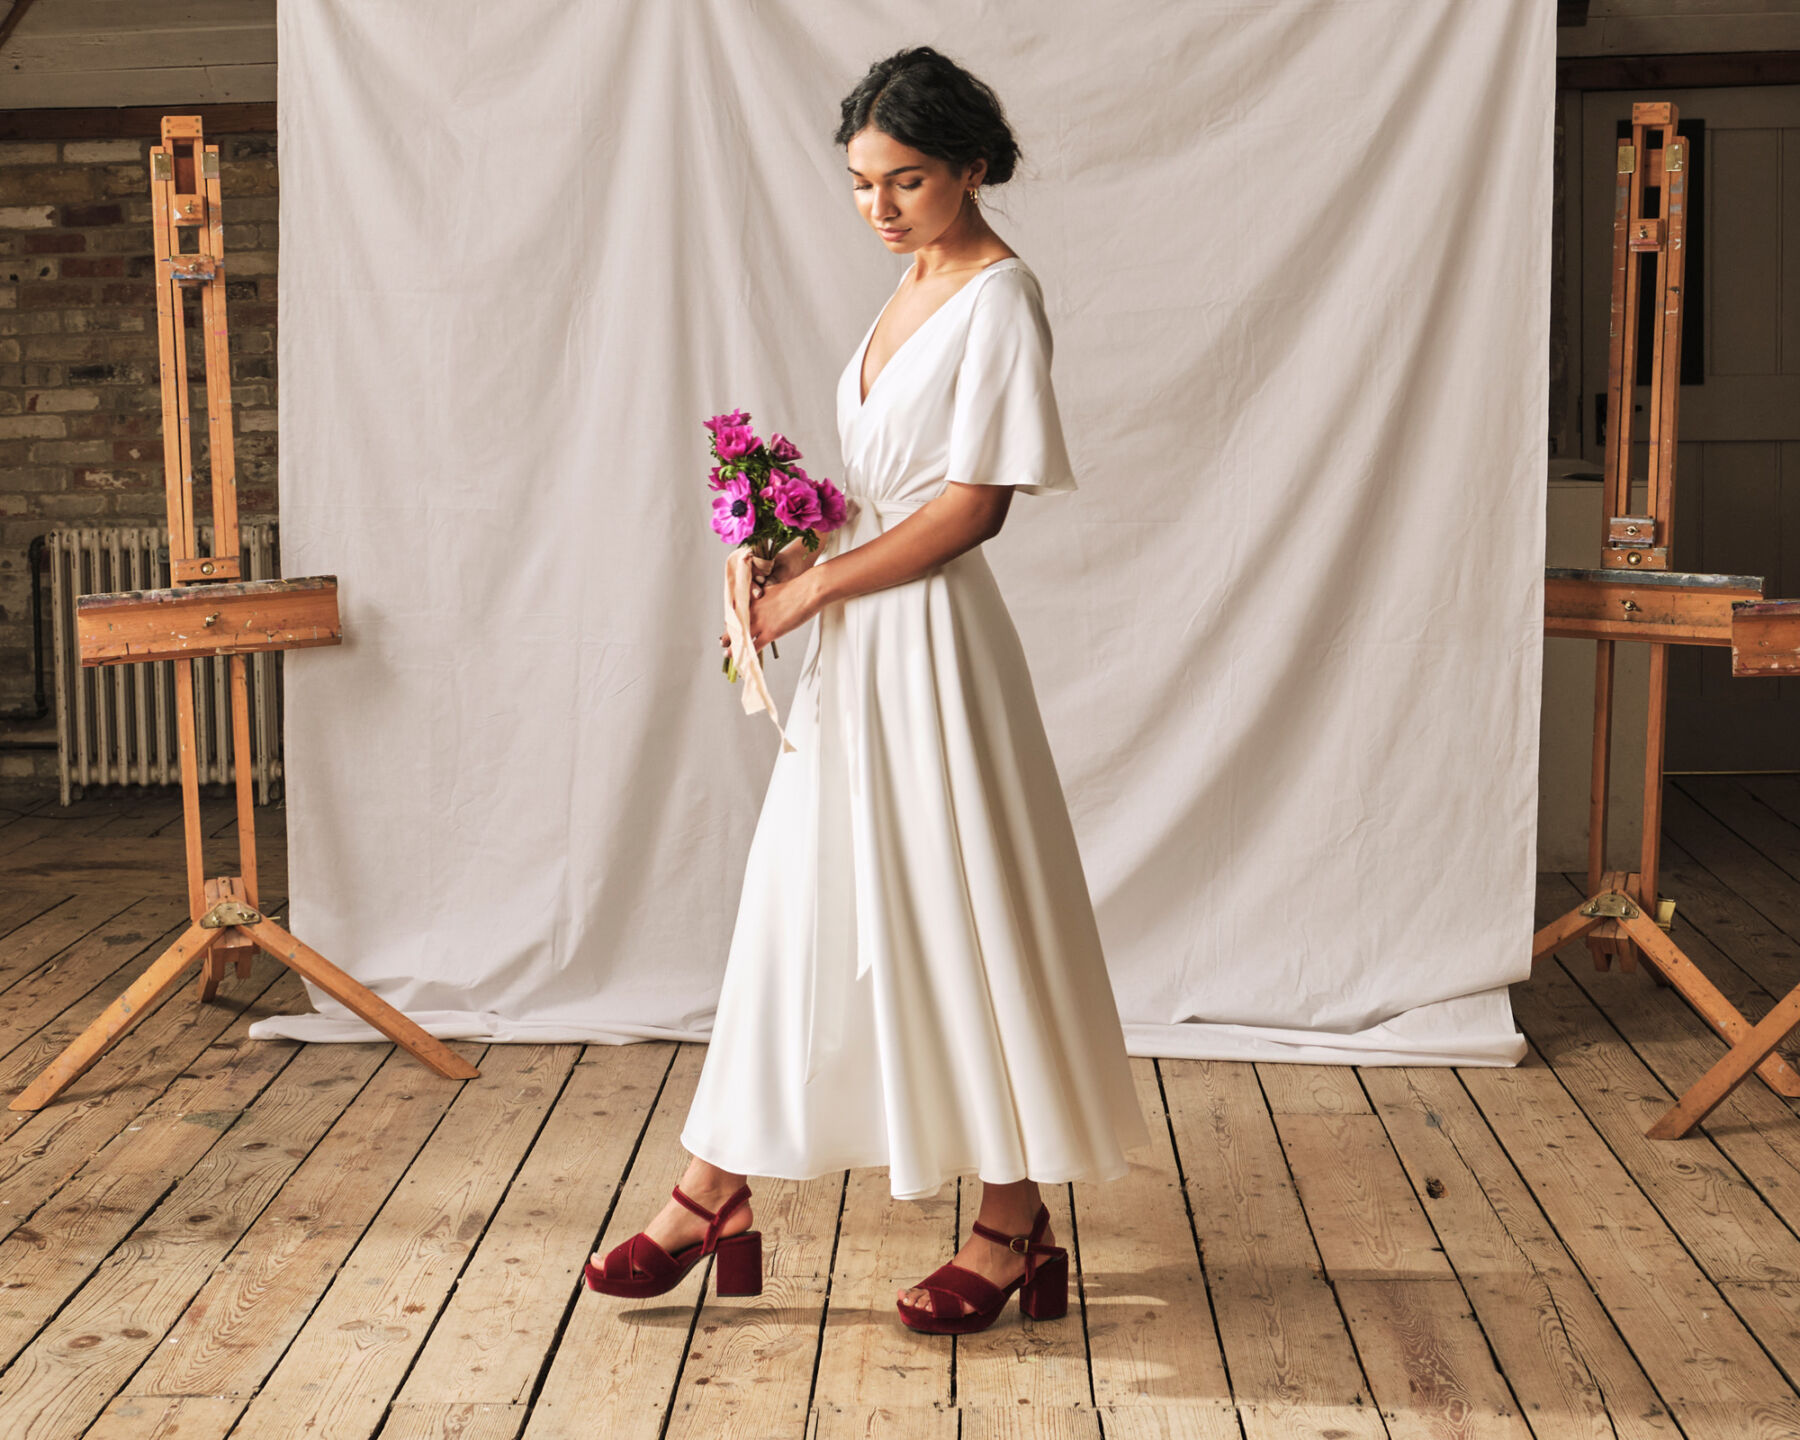 Sustainable and simple wedding dress  by Sophie Rose Bridal.